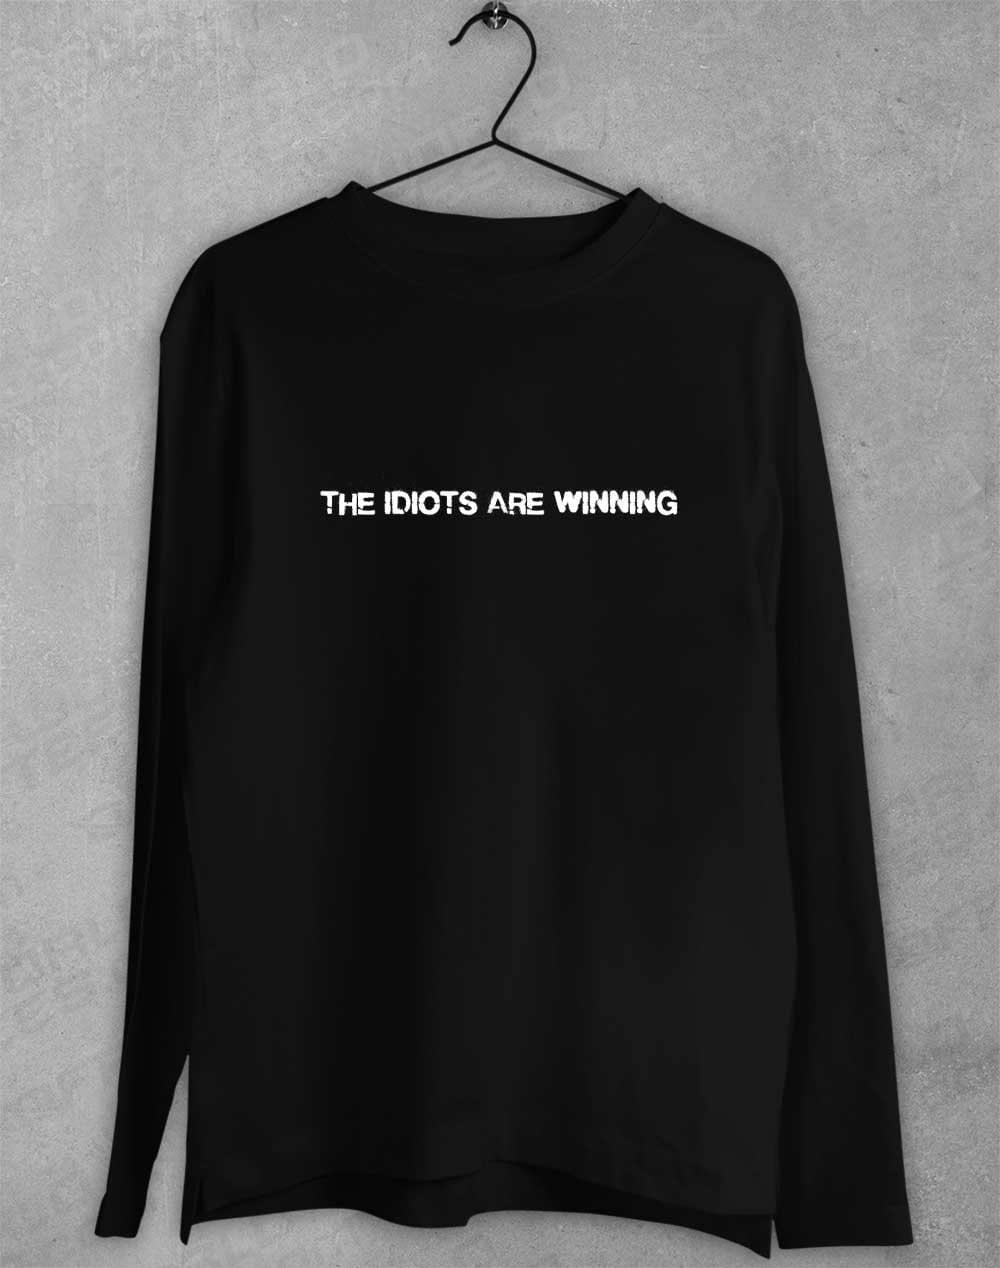 The Idiots Are Winning Long Sleeve T-Shirt S / Black  - Off World Tees